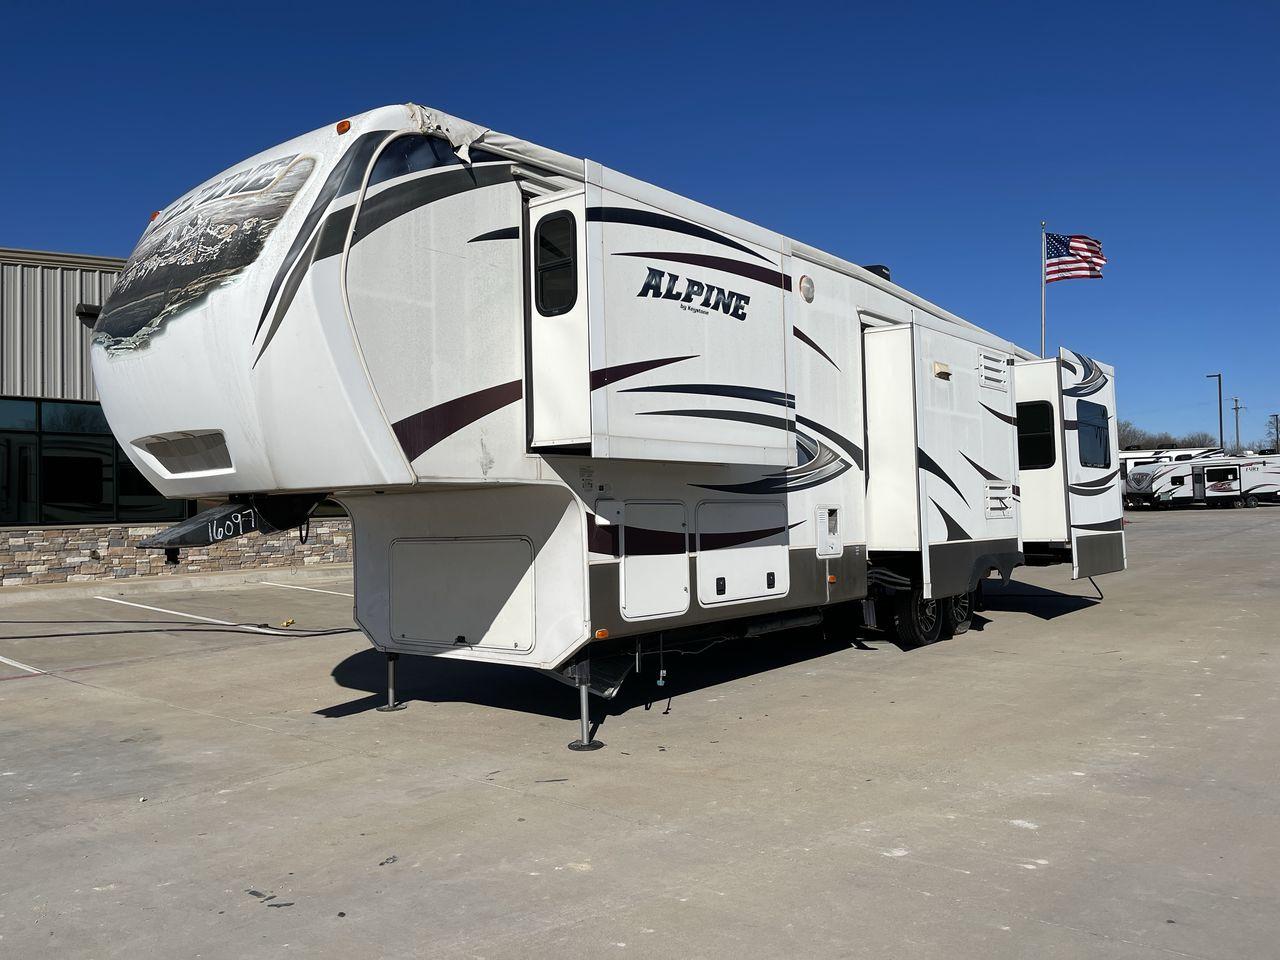 2014 WHITE ALPINE 3500RE - (4YDF35025EE) , Length: 39.17 ft. | Dry Weight: 12,379 lbs. | Gross Weight: 15,500 lbs. | Slides: 4 transmission, located at 4319 N Main St, Cleburne, TX, 76033, (817) 678-5133, 32.385960, -97.391212 - The 2014 Alpine 3500RE fifth wheel combines style and utility. For individuals looking for a luxurious home on wheels, this RV's amenities are precisely crafted and comfort-oriented. The dimensions of this unit are 39.17 ft in length, 8 ft in width, and 12.67 ft in height. It has a dry weight of 12, - Photo #24